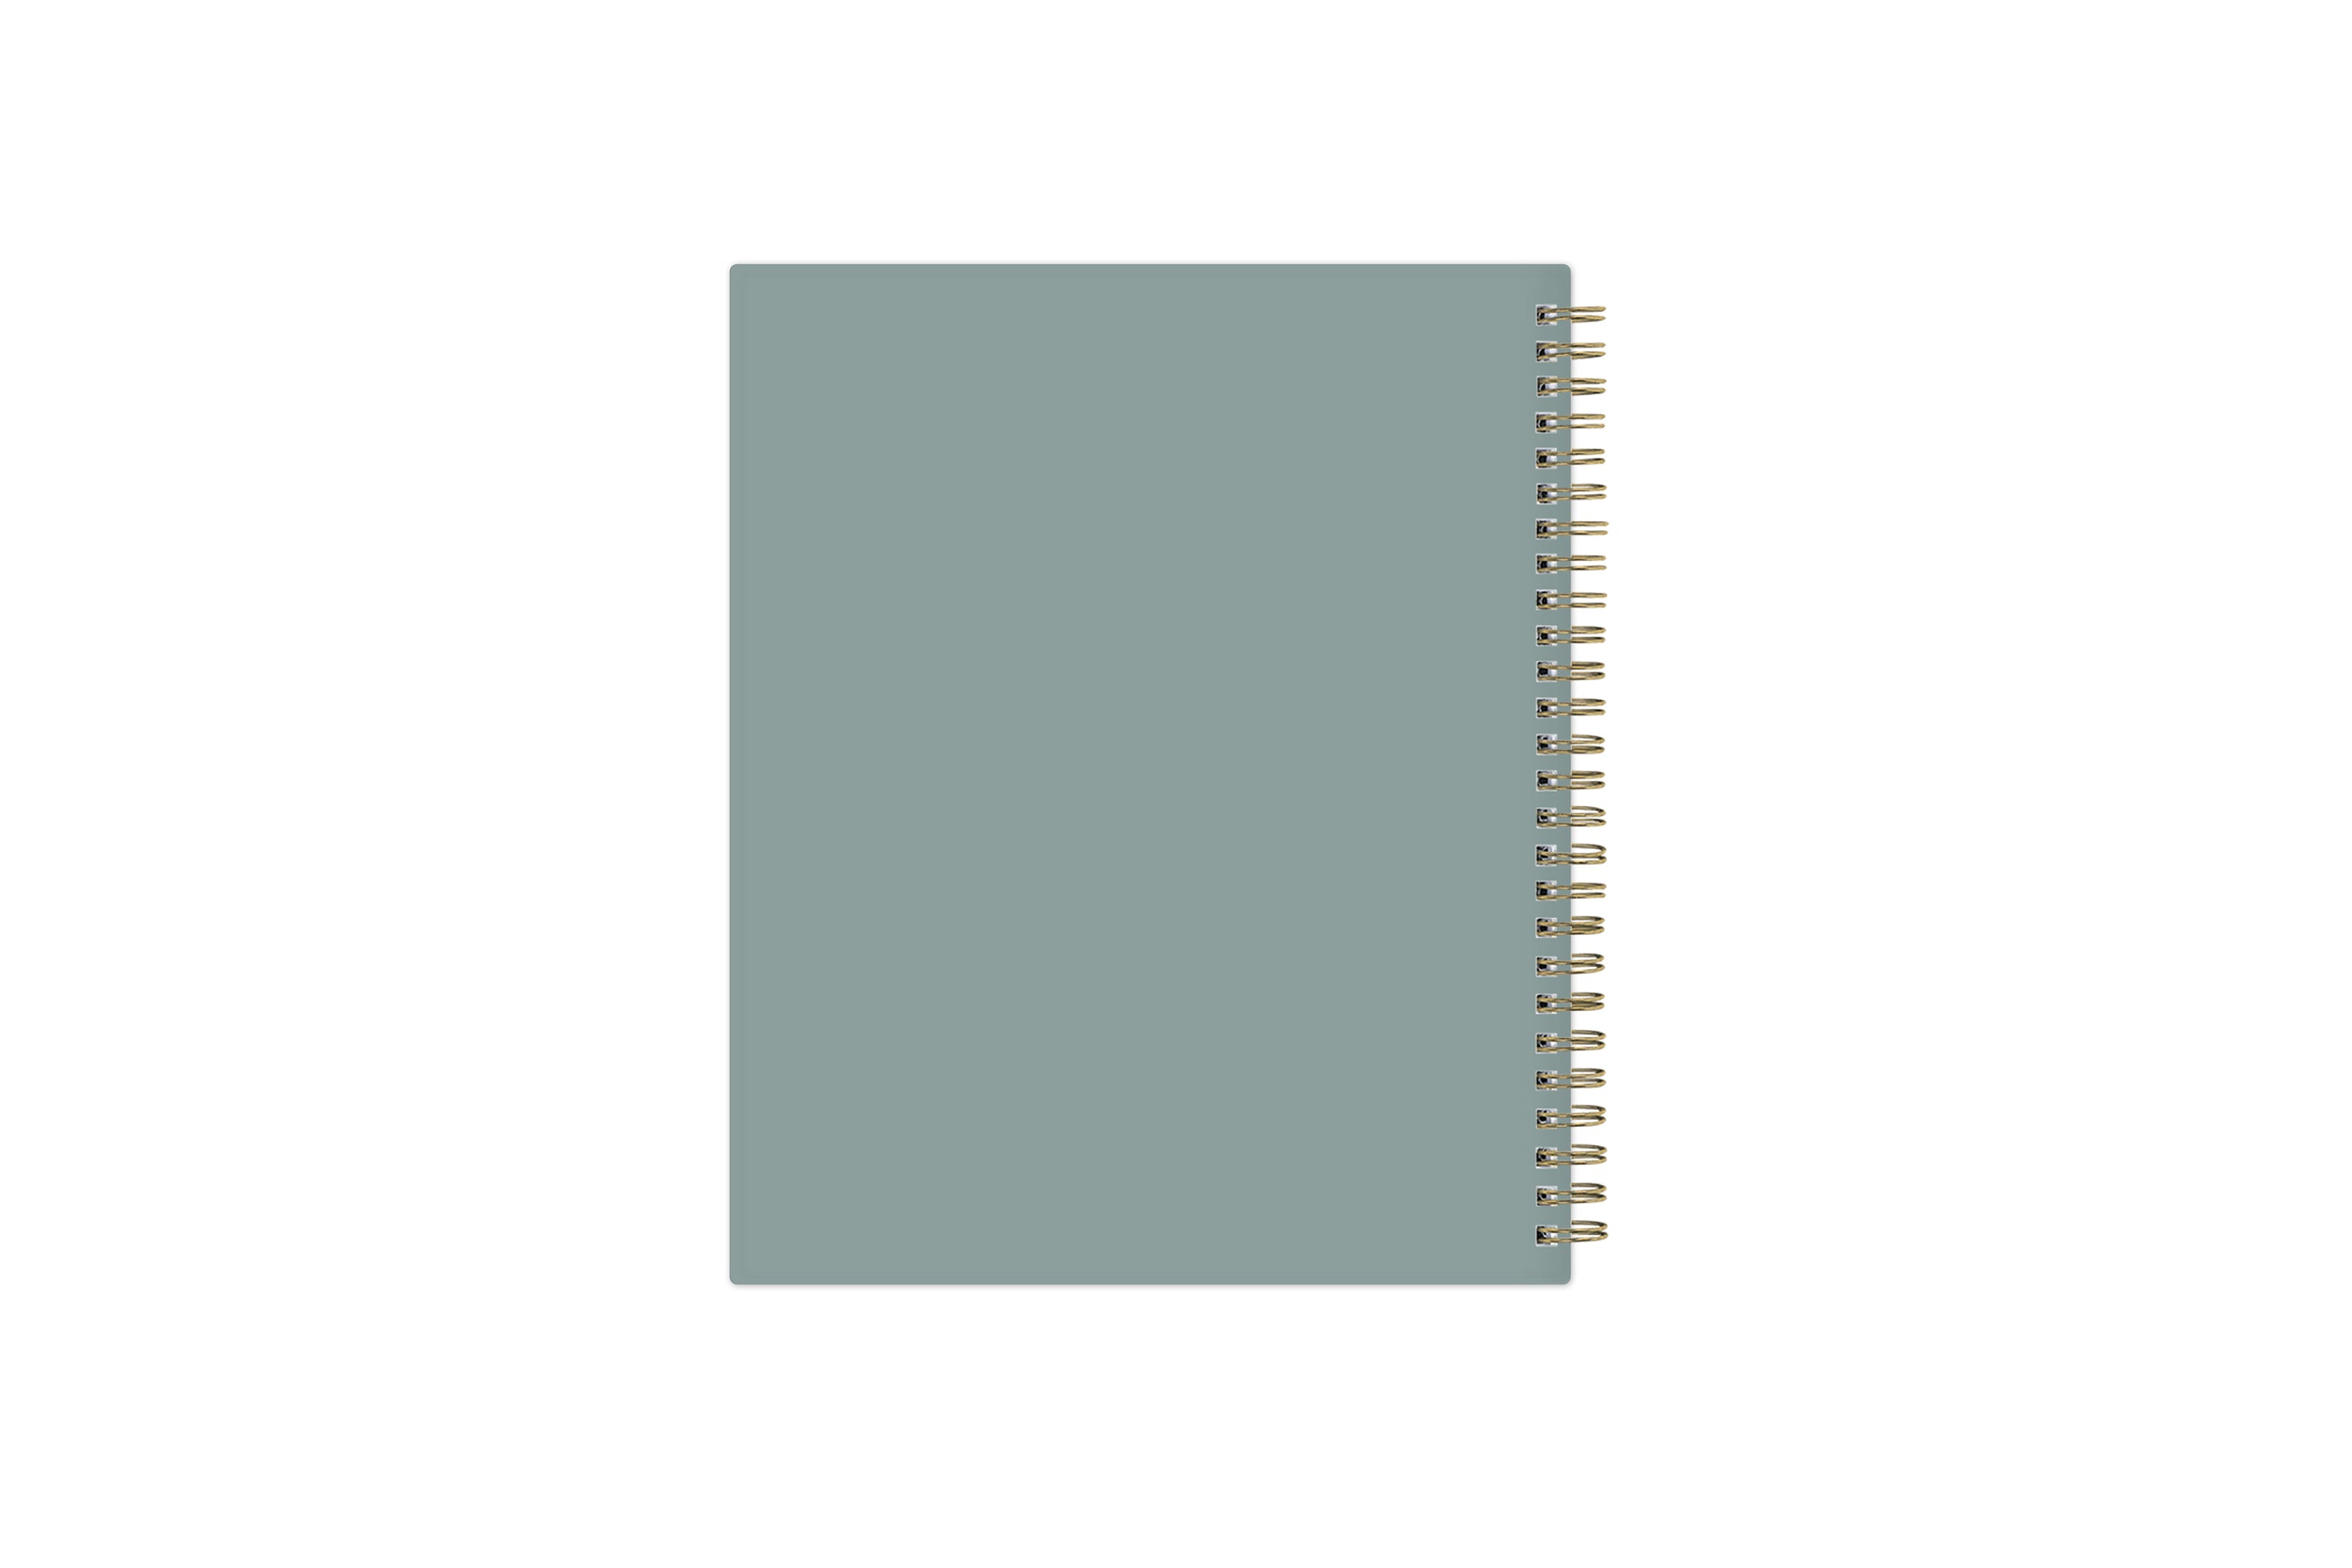 soft neutral olive green back cover in 7x9 planner size